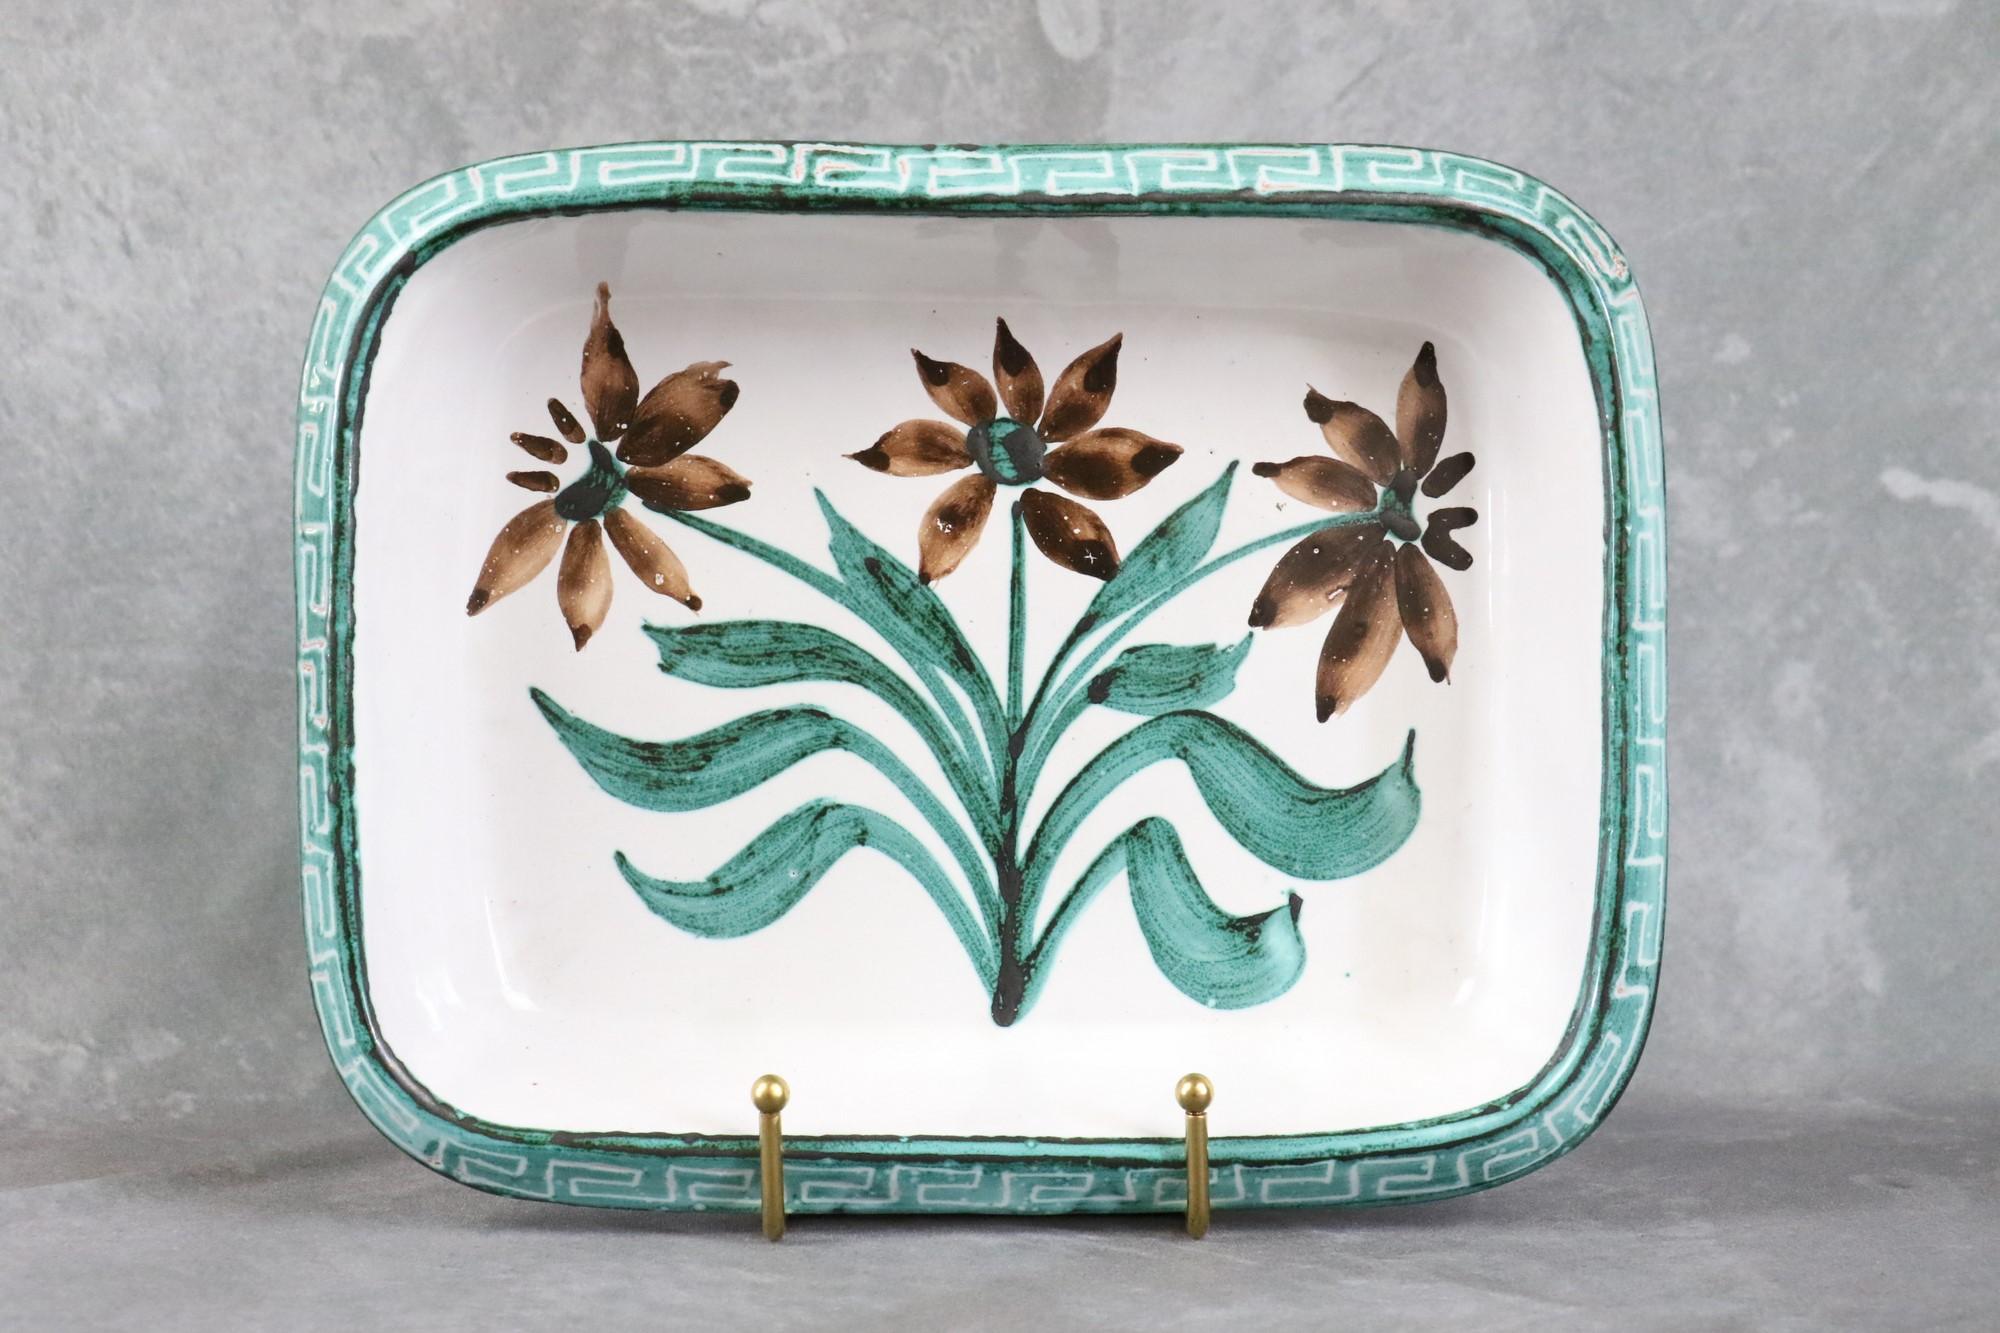 French ceramic dish by Robert Picault. Signed. Vallauris, France - 1950s.

Large dish enamelled in white, brown and green tones. 
Decorated with three big flowers and geometric decorations on the edge. 
In good condition.
It is signed 